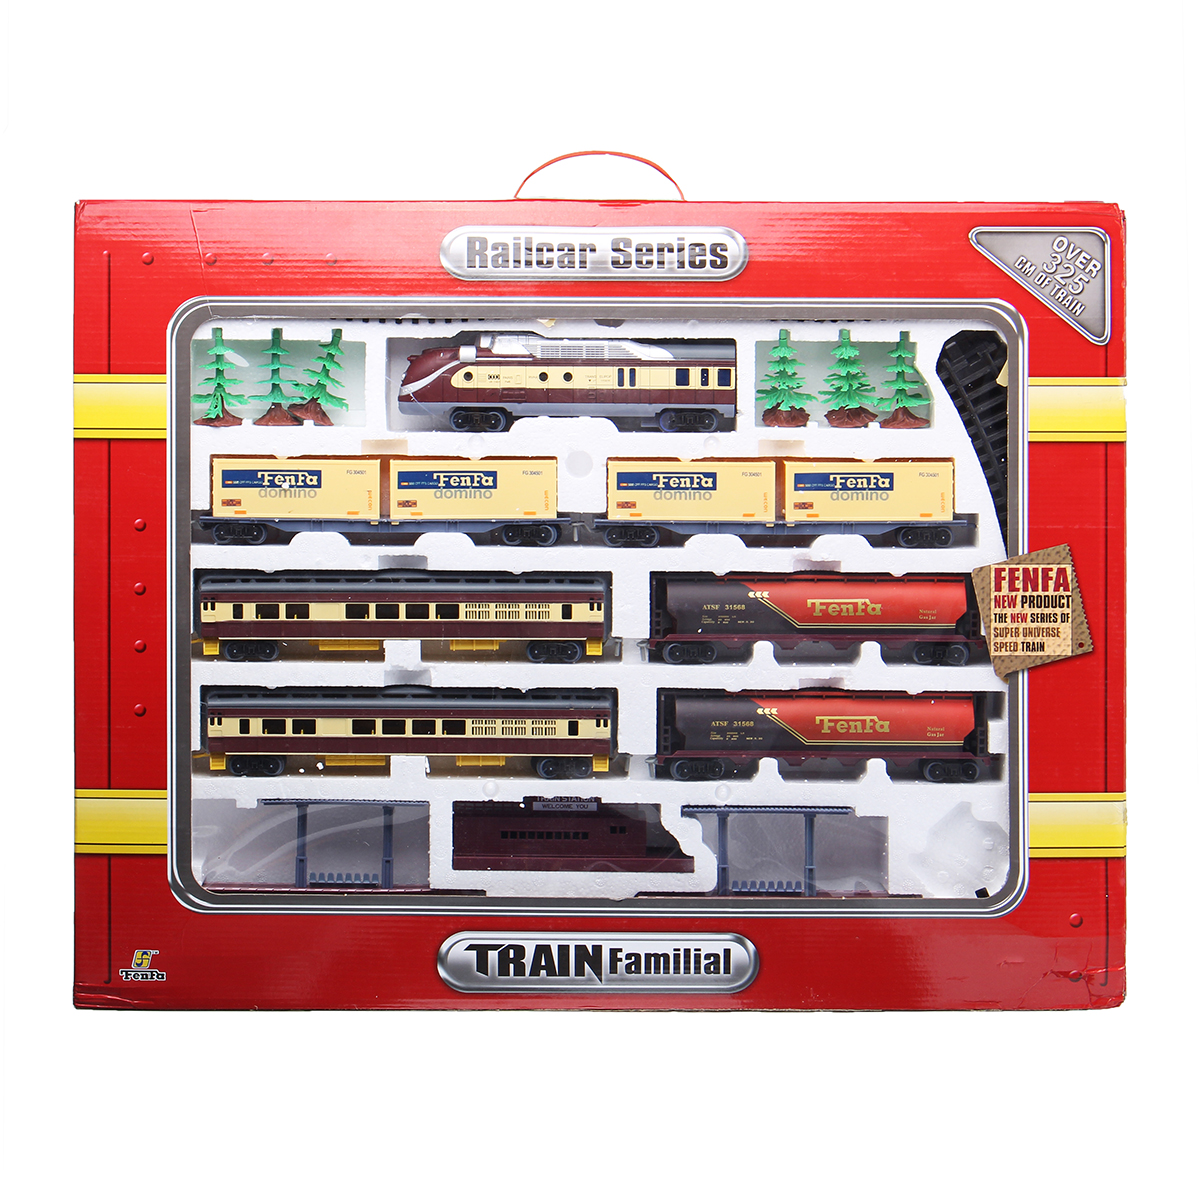 Electric Classic Train Rail Vehicle Toys Set Track Music Light Operated Carriages Educational Gift 17